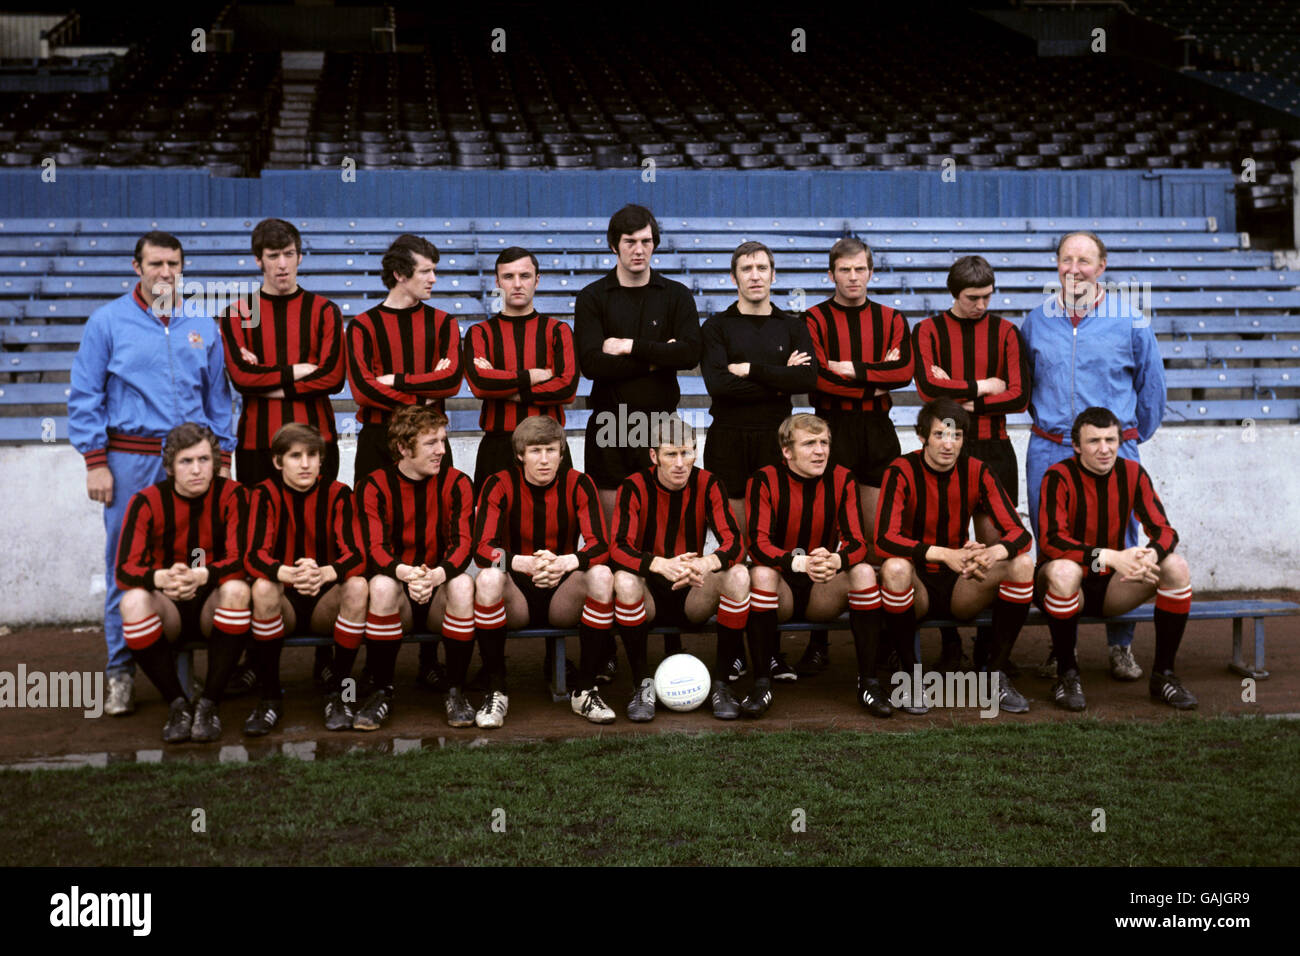 Members of Manchester City Football Club. Back row, Left to right: Malcolm Allison (assistant manager and coach), Tommy Booth, Mike Doyle, Glyn Pardoe, Joe Corrigan, Harry Dowd, Alan Oakes, Willie Donachie and Dave Ewing (trainer). Front row, left to right: Tony Towers, Frank Carrodus, Ian Bowyer, Colin Bell, Tony Book (captain), Francis Lee, Neil Young, and Mike Summerbee. Stock Photo